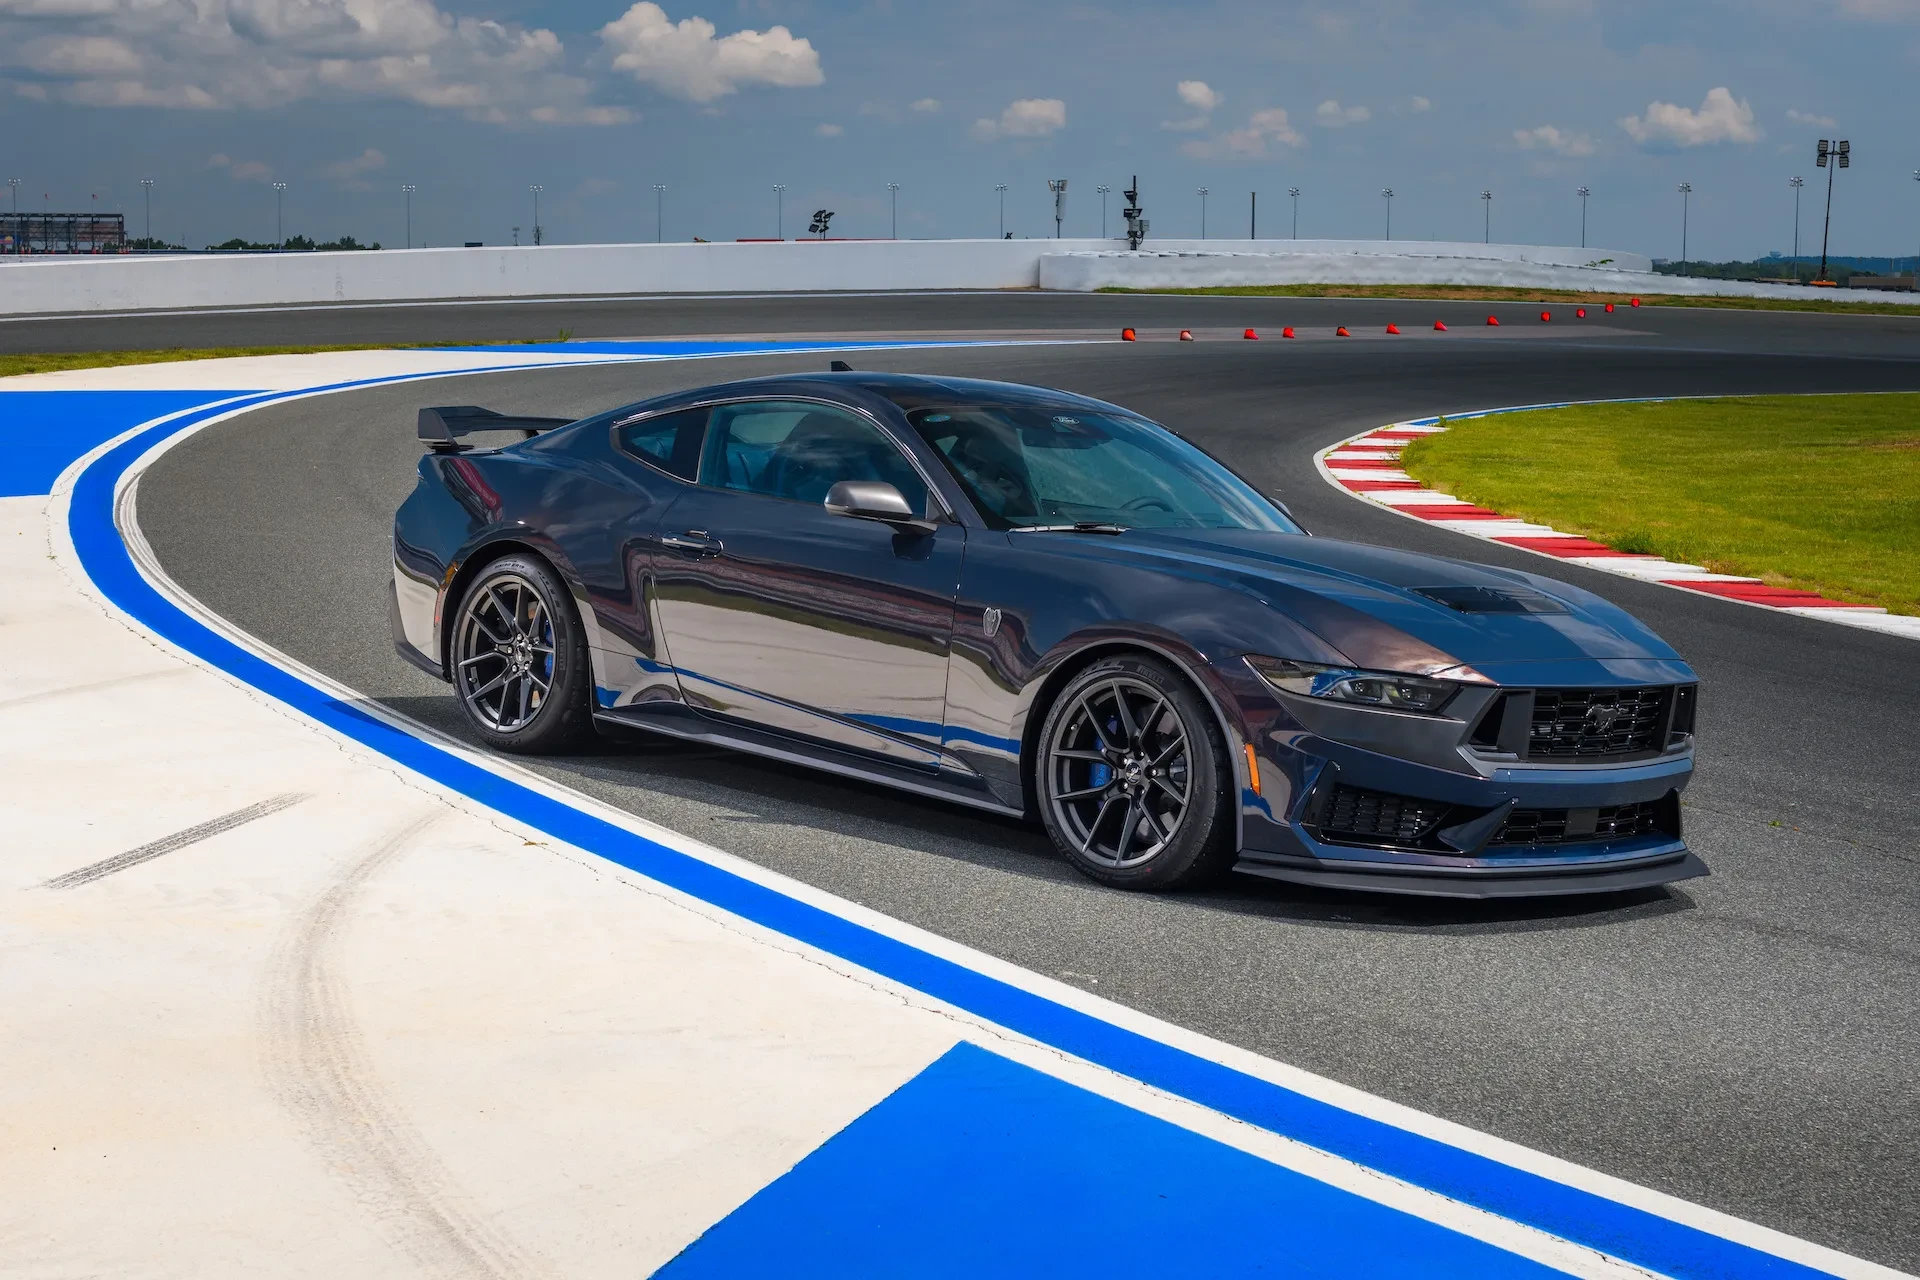 Confirmed: Ford Isn't Giving Up on the V8 Mustang Yet